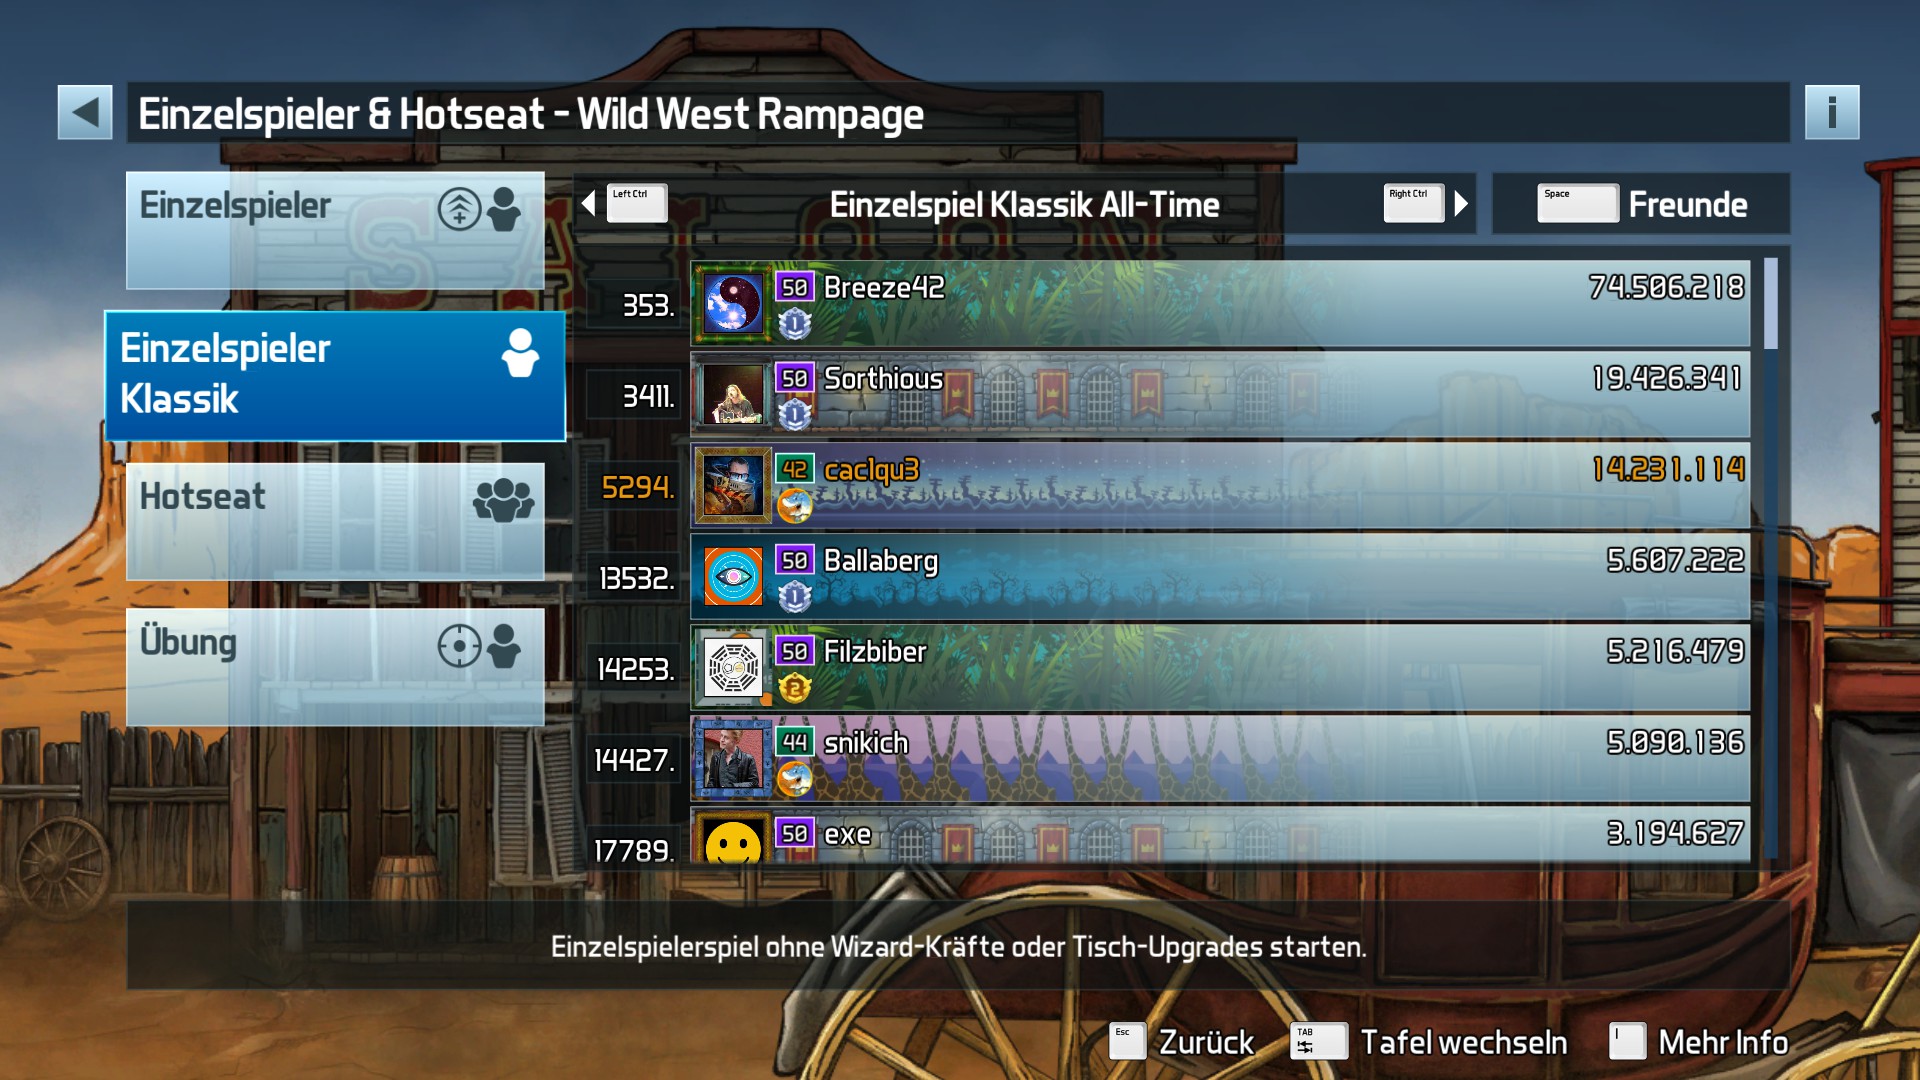 e2e4: Pinball FX3: Wild West Rampage [Classic] (PC) 14,231,114 points on 2022-05-20 19:05:11